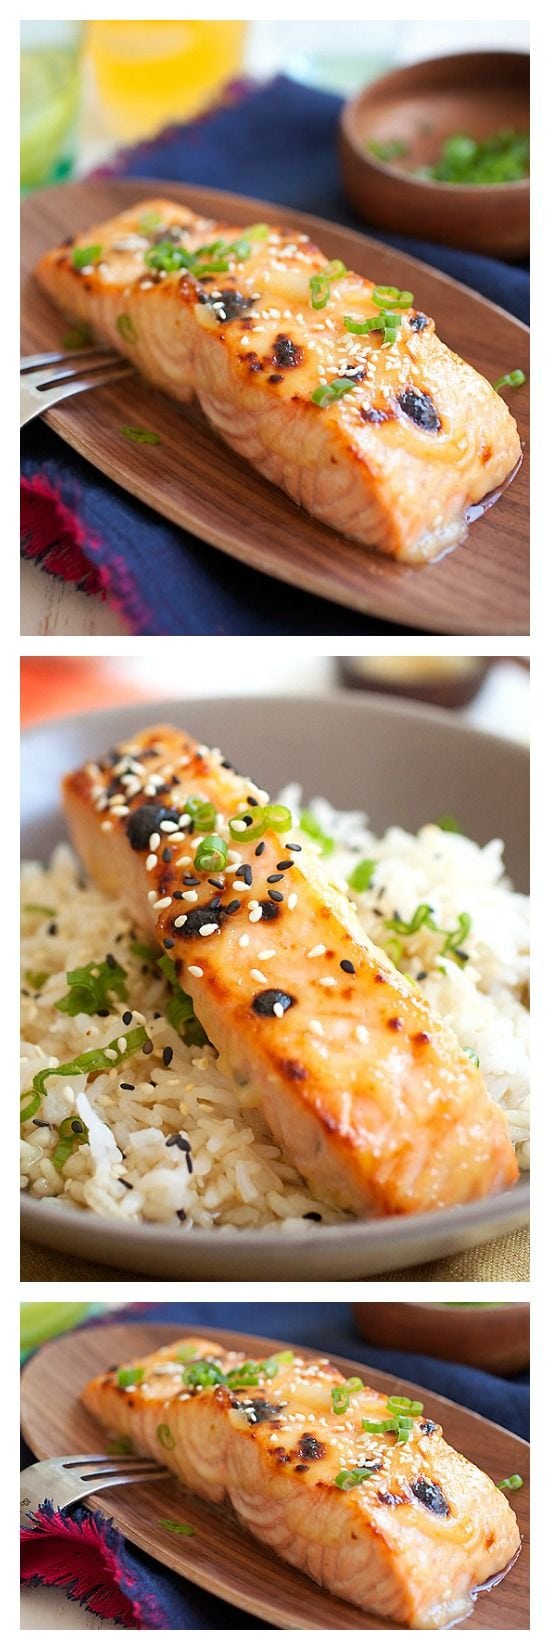 Miso-glazed broiled salmon - quick and easy recipe that takes only 15 minutes | rasamalaysia.com